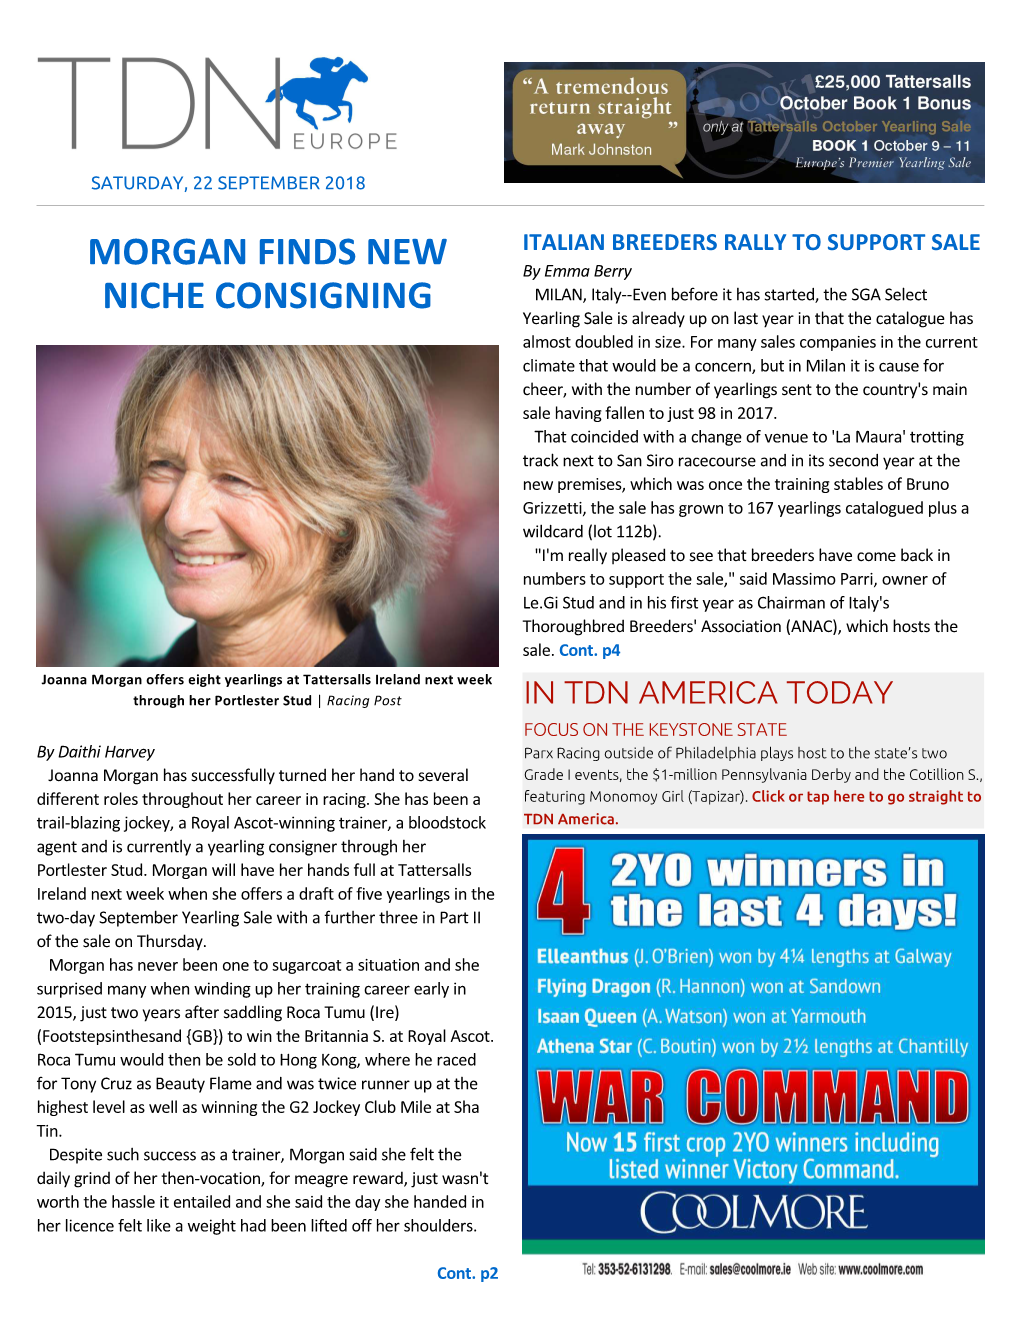 Morgan Finds New Niche Consigning Cont